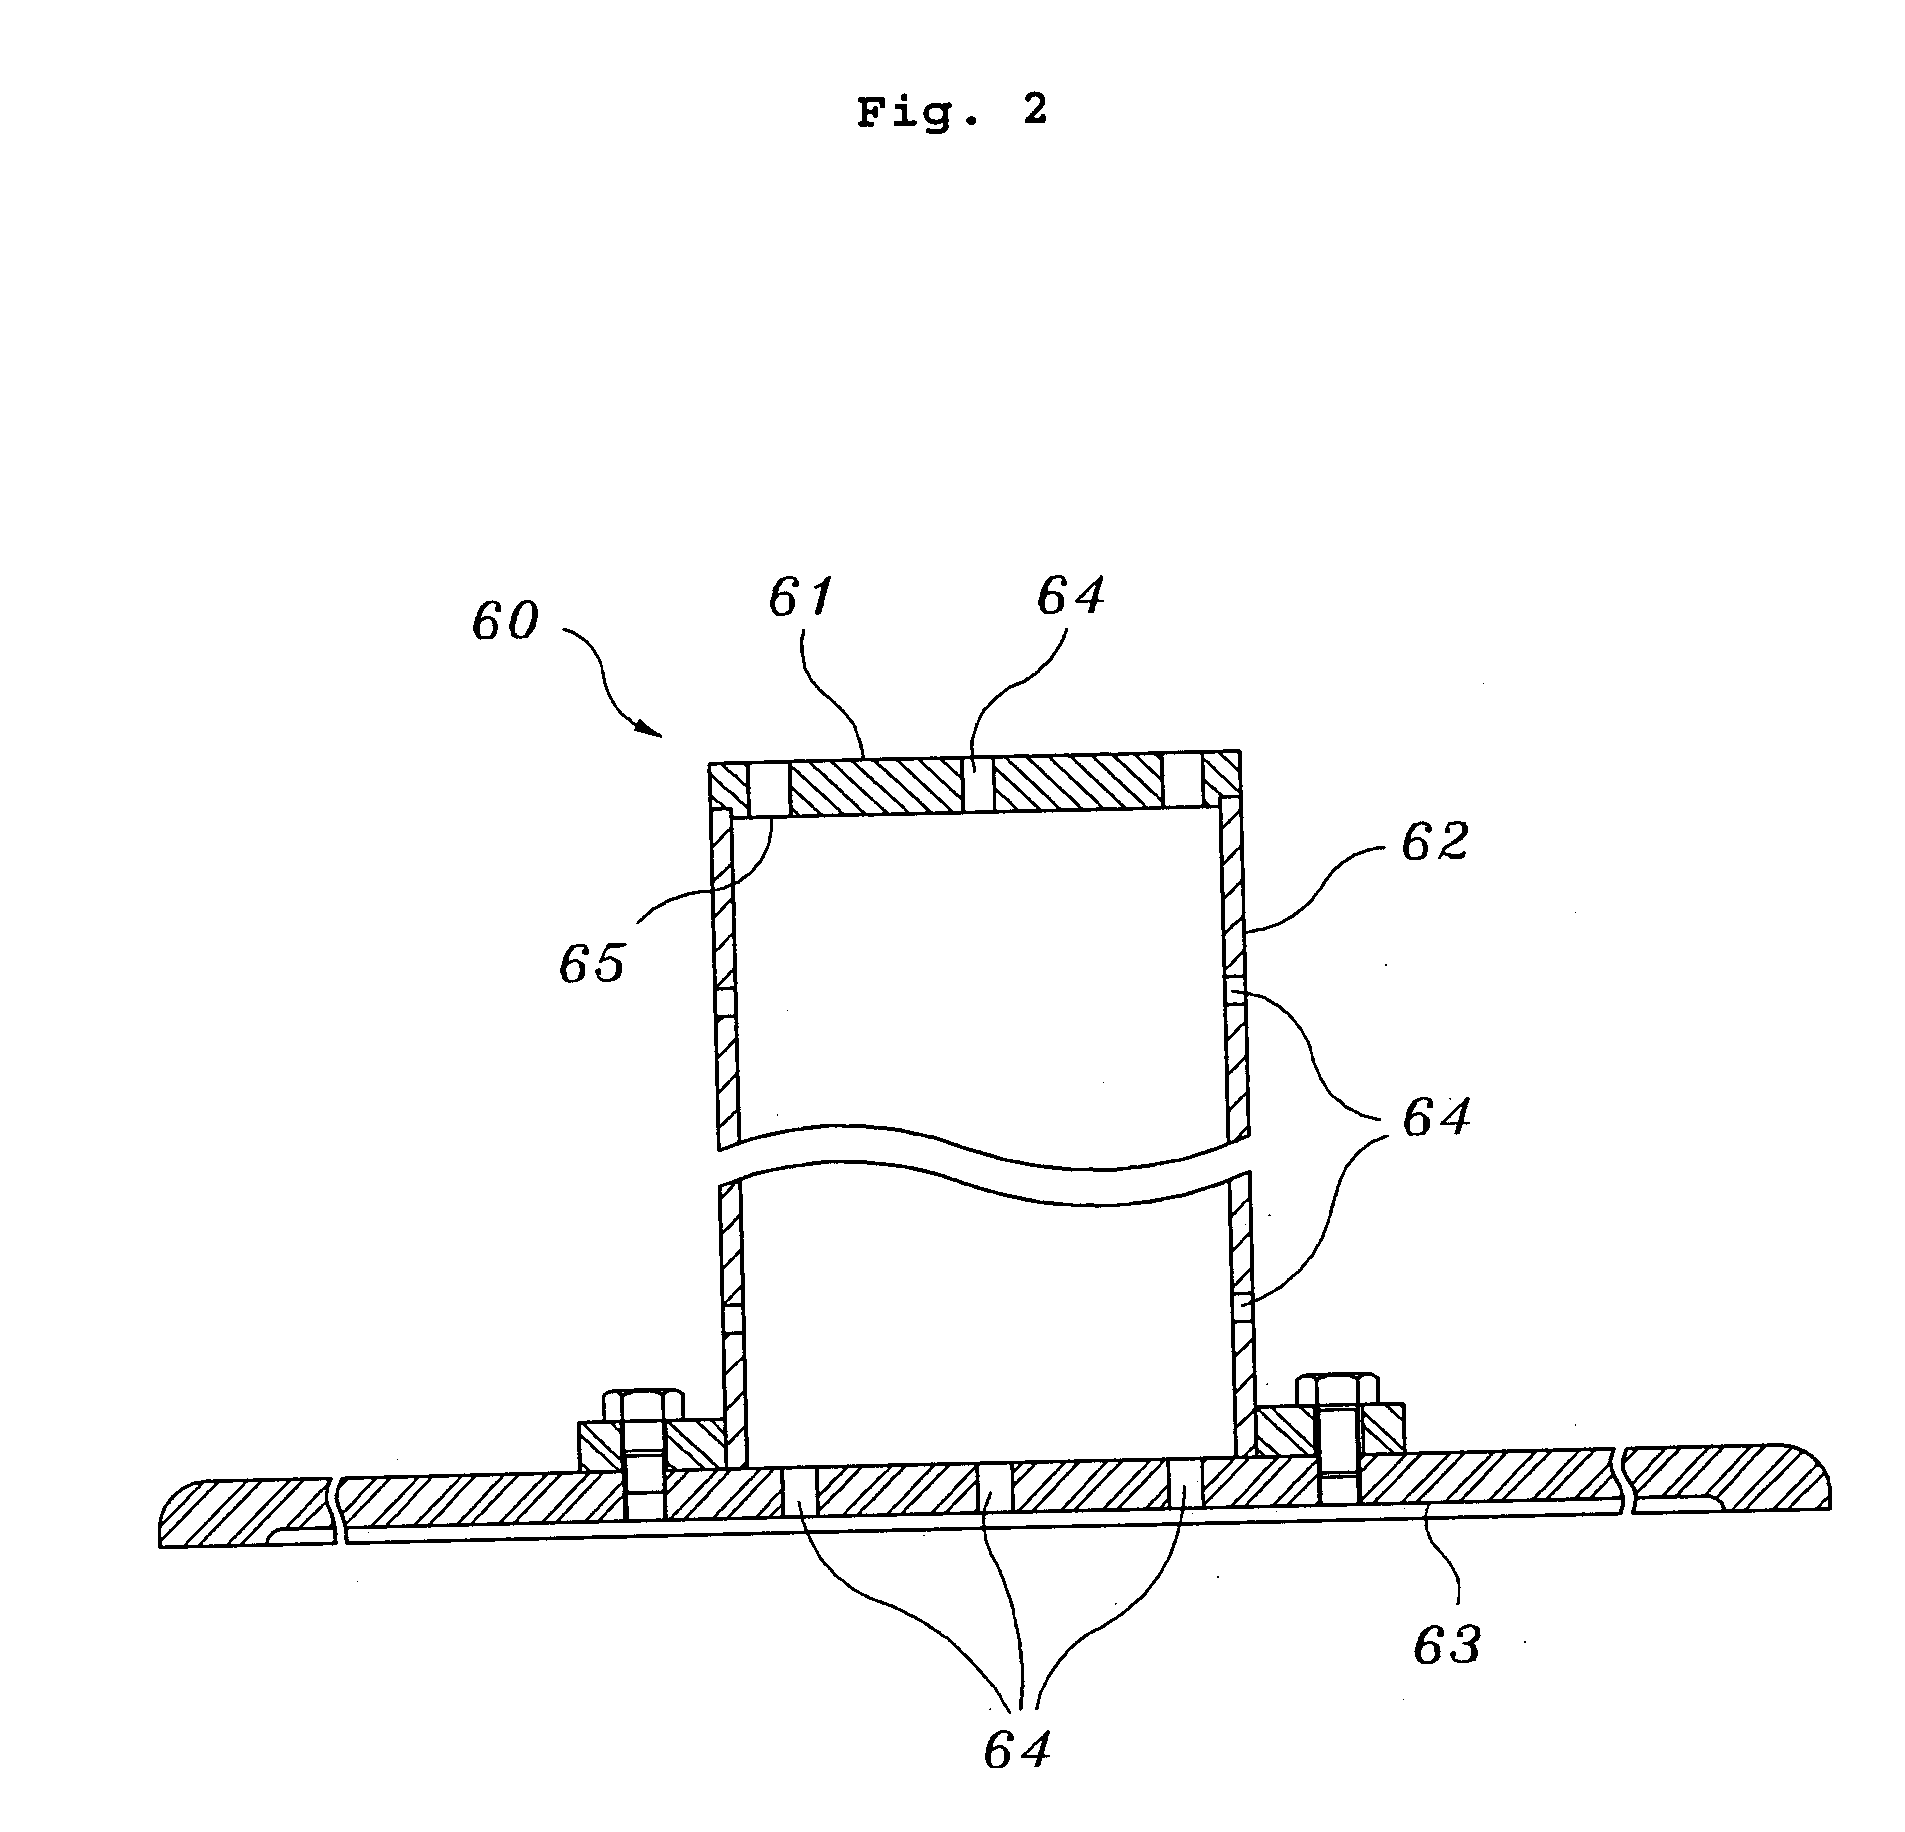 Capsule assembling apparatus for neutron re-irradiation experiments